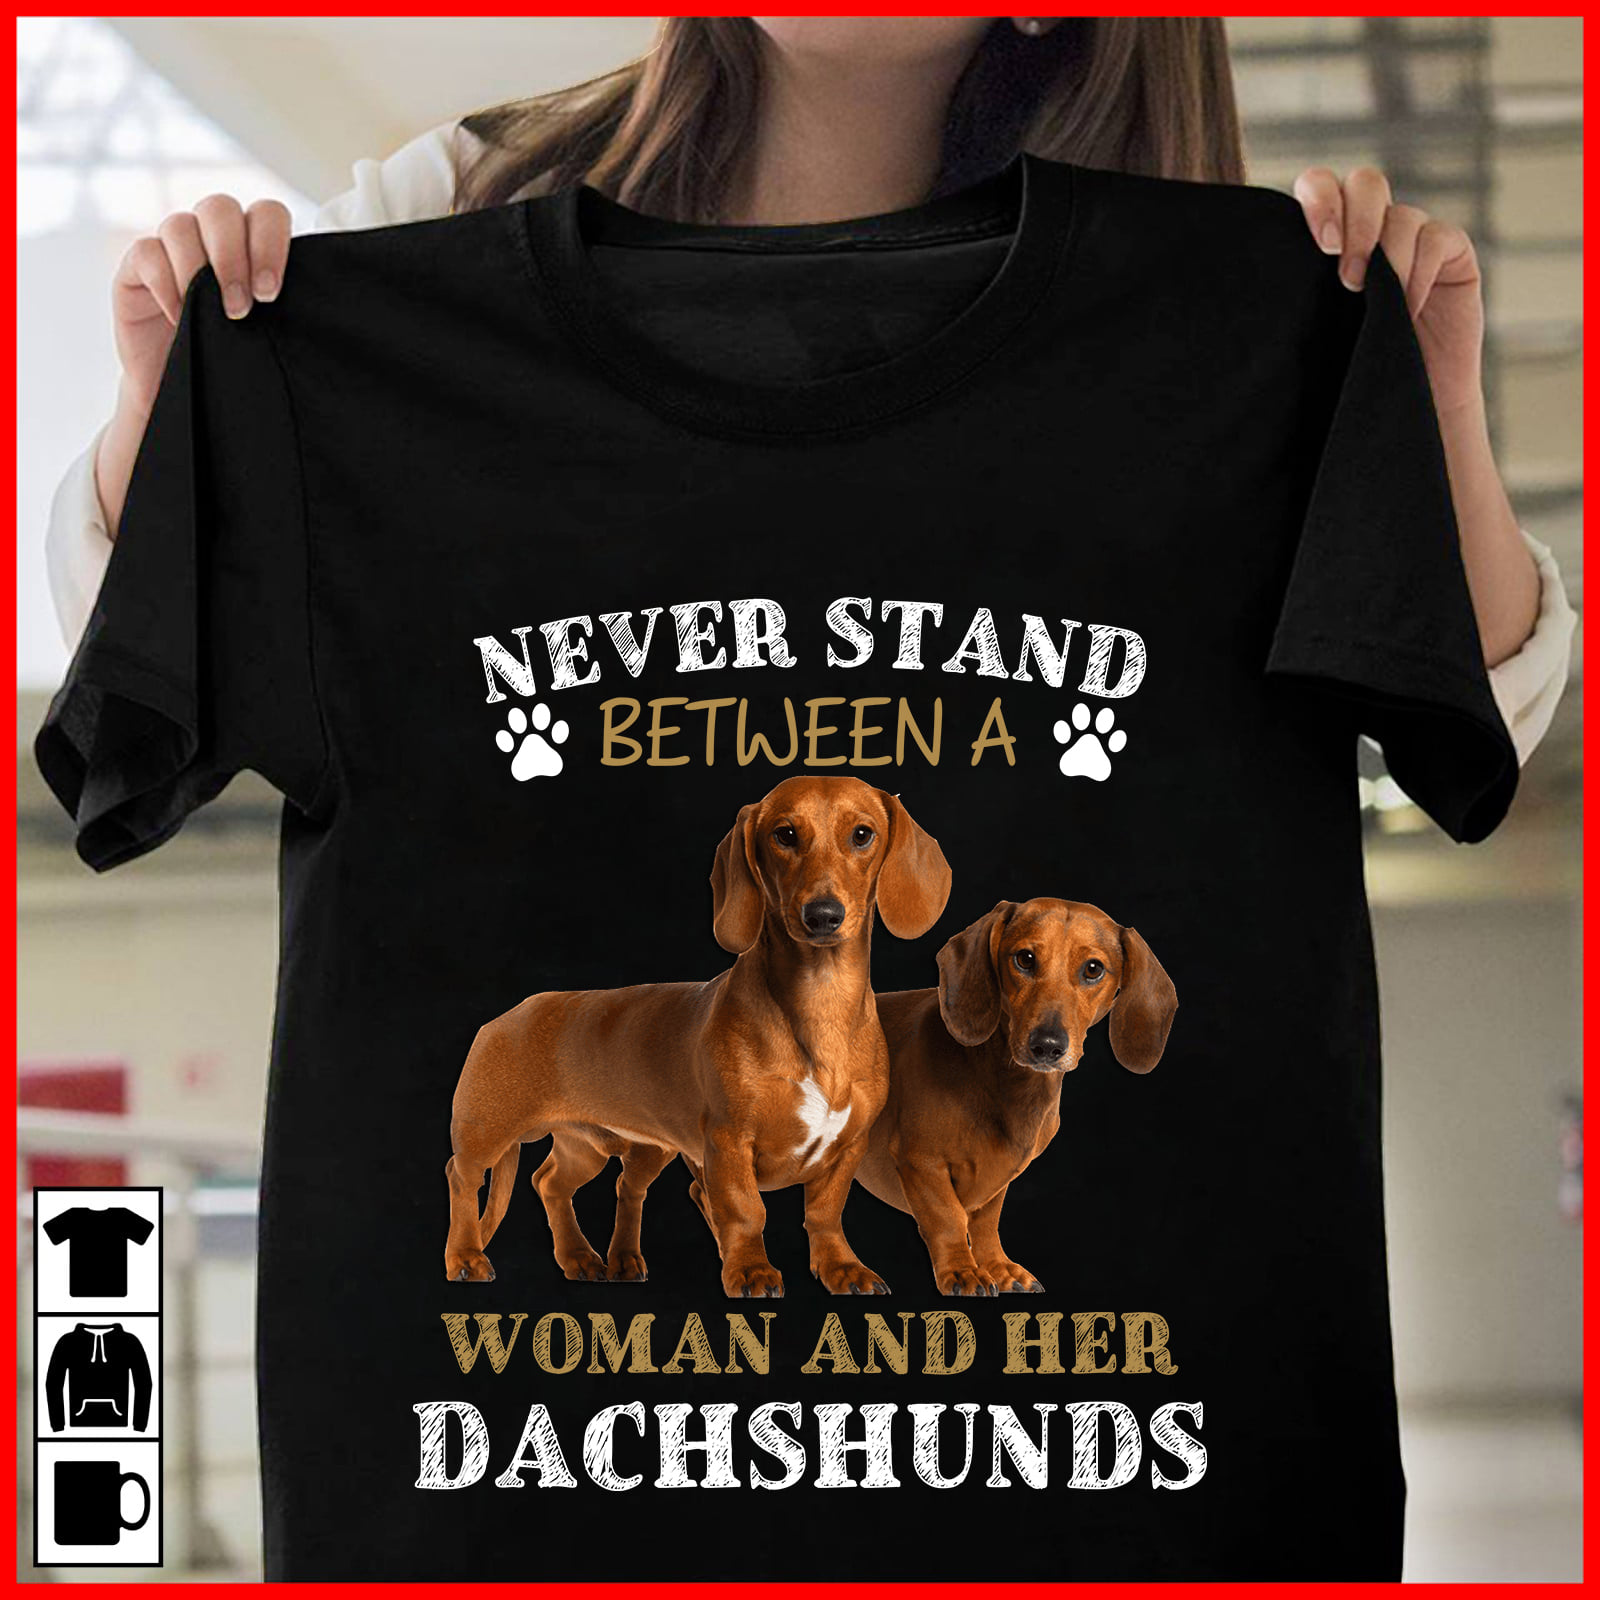 Never stand between a woman and her Dachshunds - Dachshunds dog